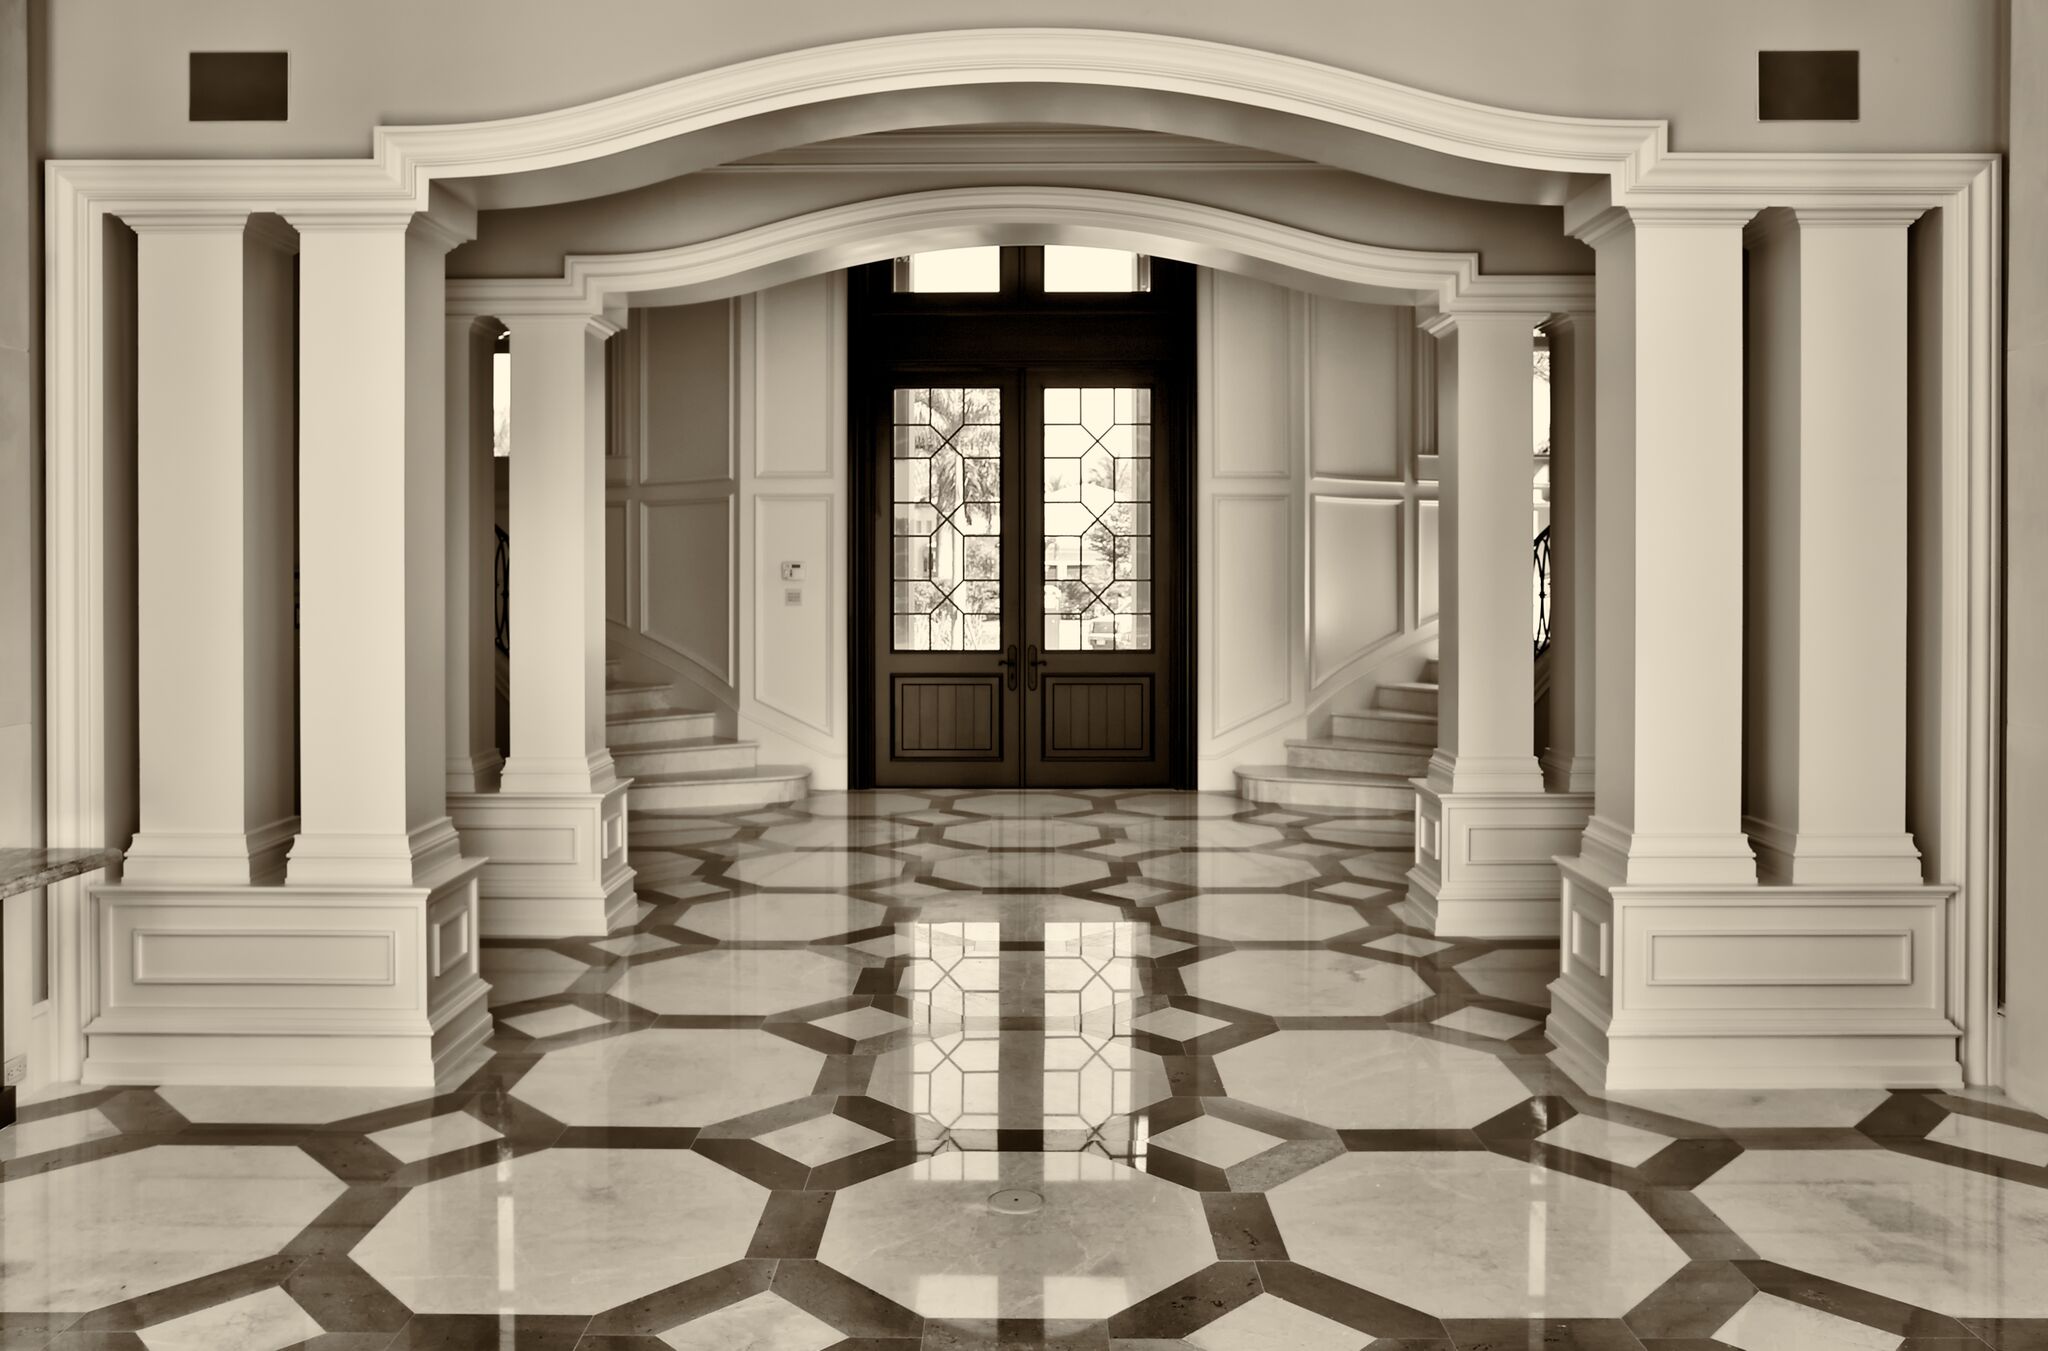 Tile Installation Services and Flooring in Palm Beach